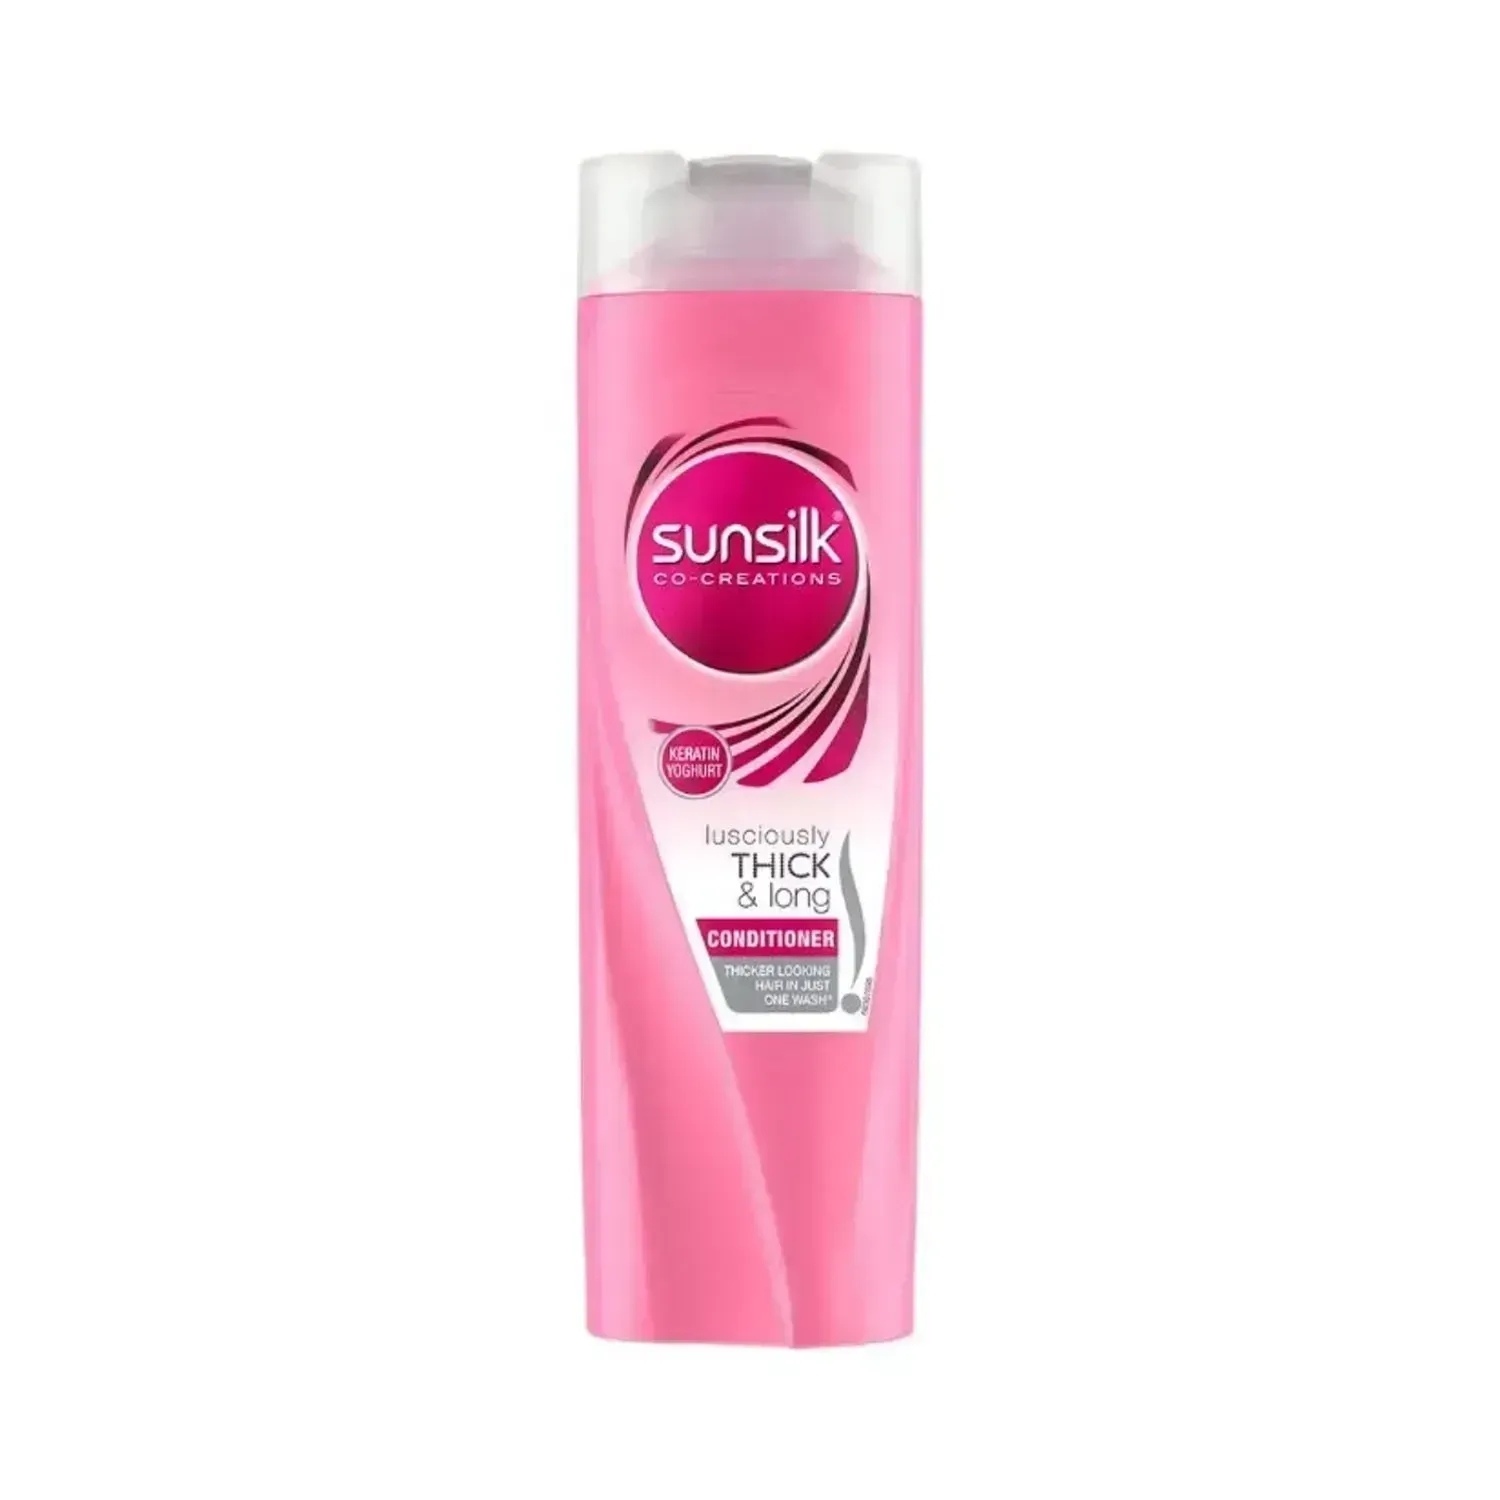 Sunsilk Lusciously Thick & Long Conditioner - (340ml)